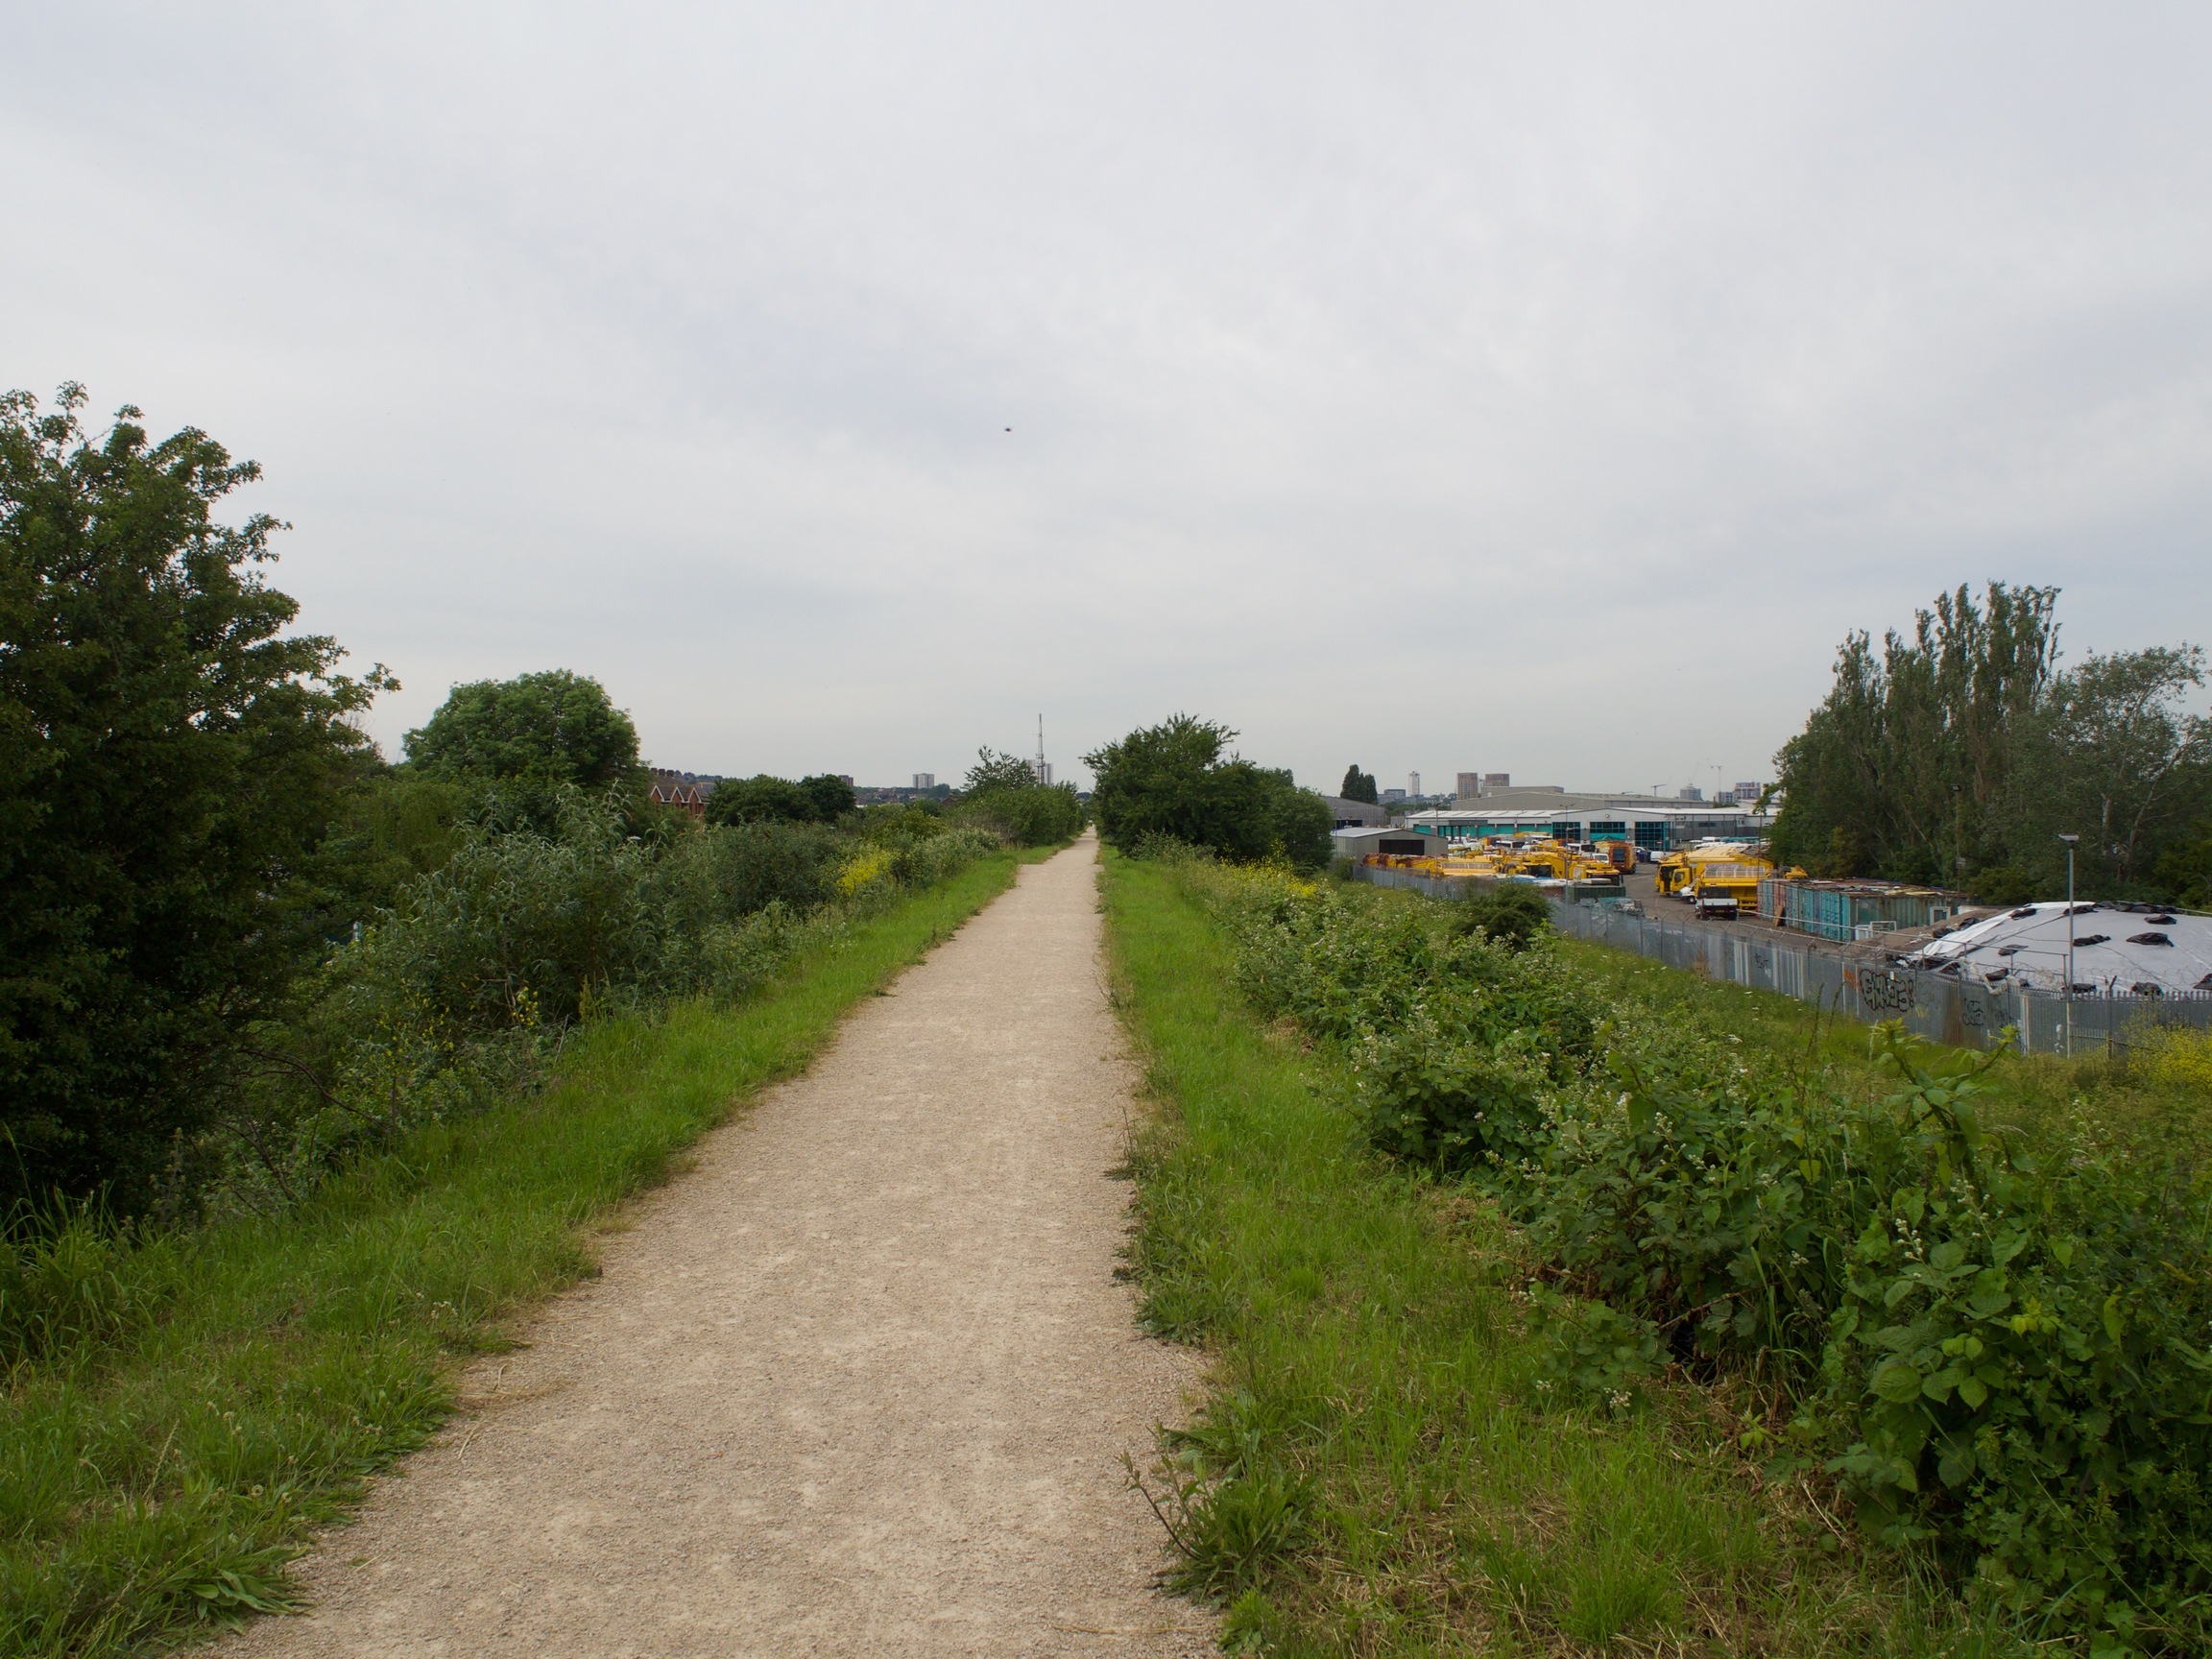 A dirt path heading forward with grass and trees on either side, and some yellow industrial machinery off to the right.